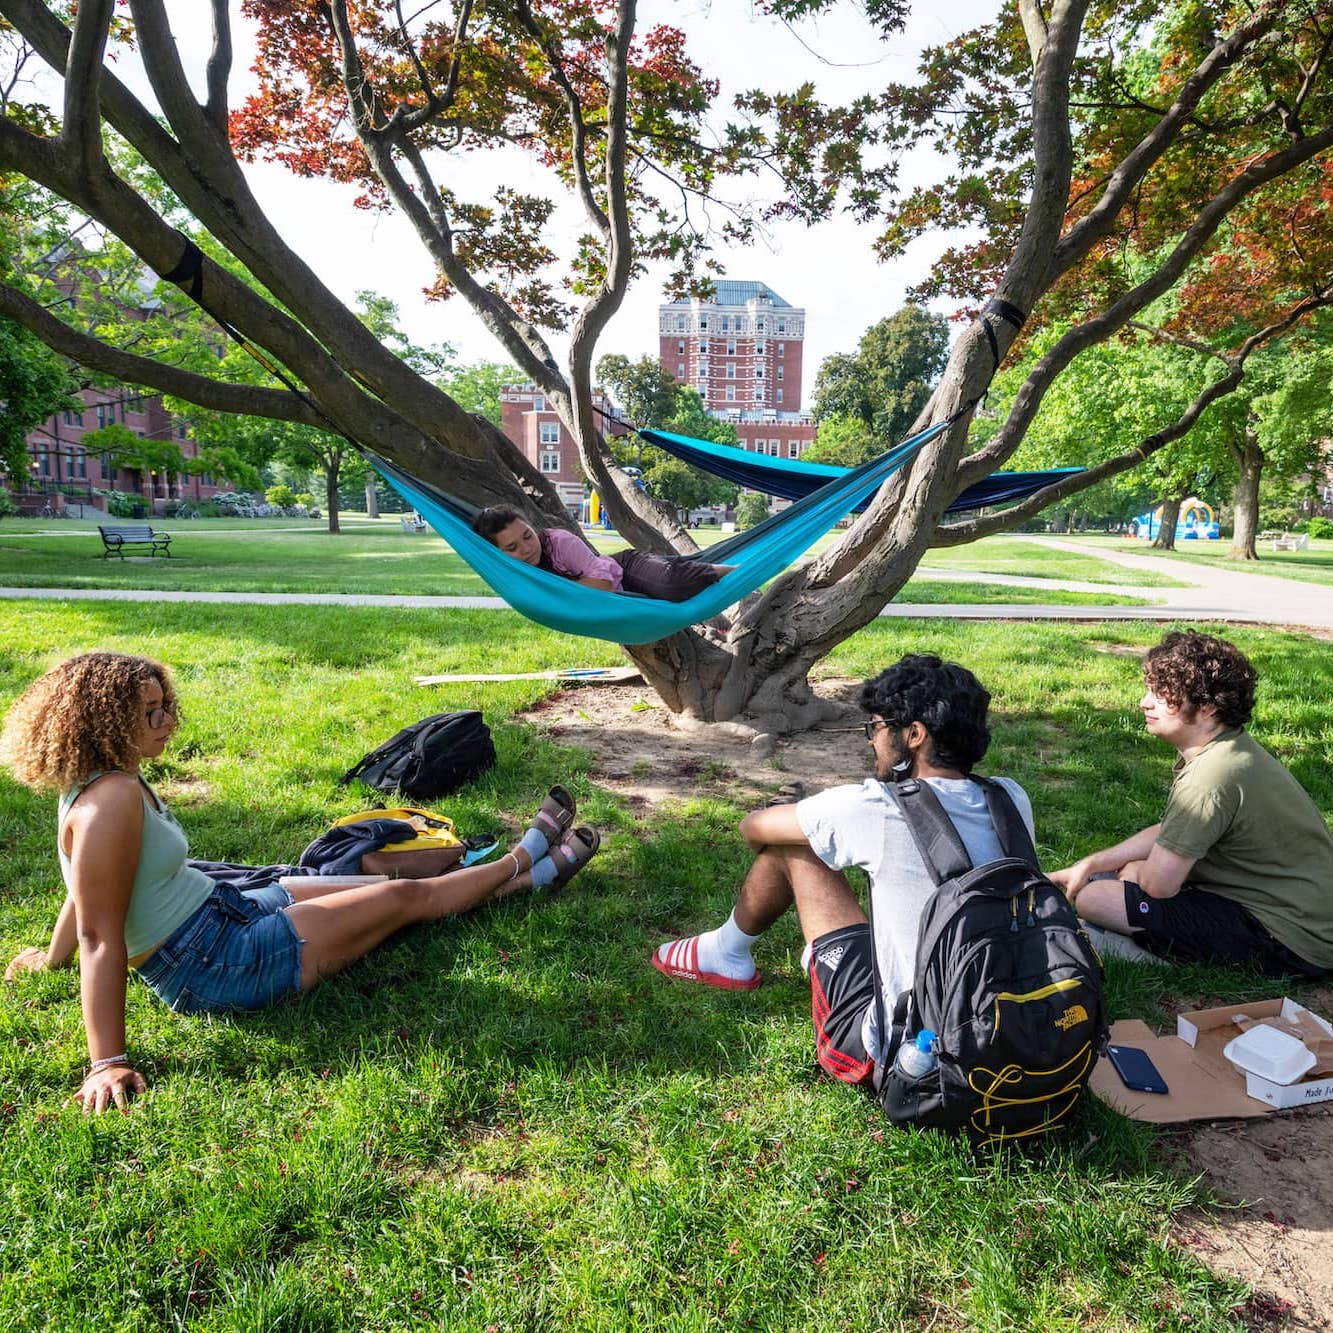 Three students relaxing on a green lawn under a tree.